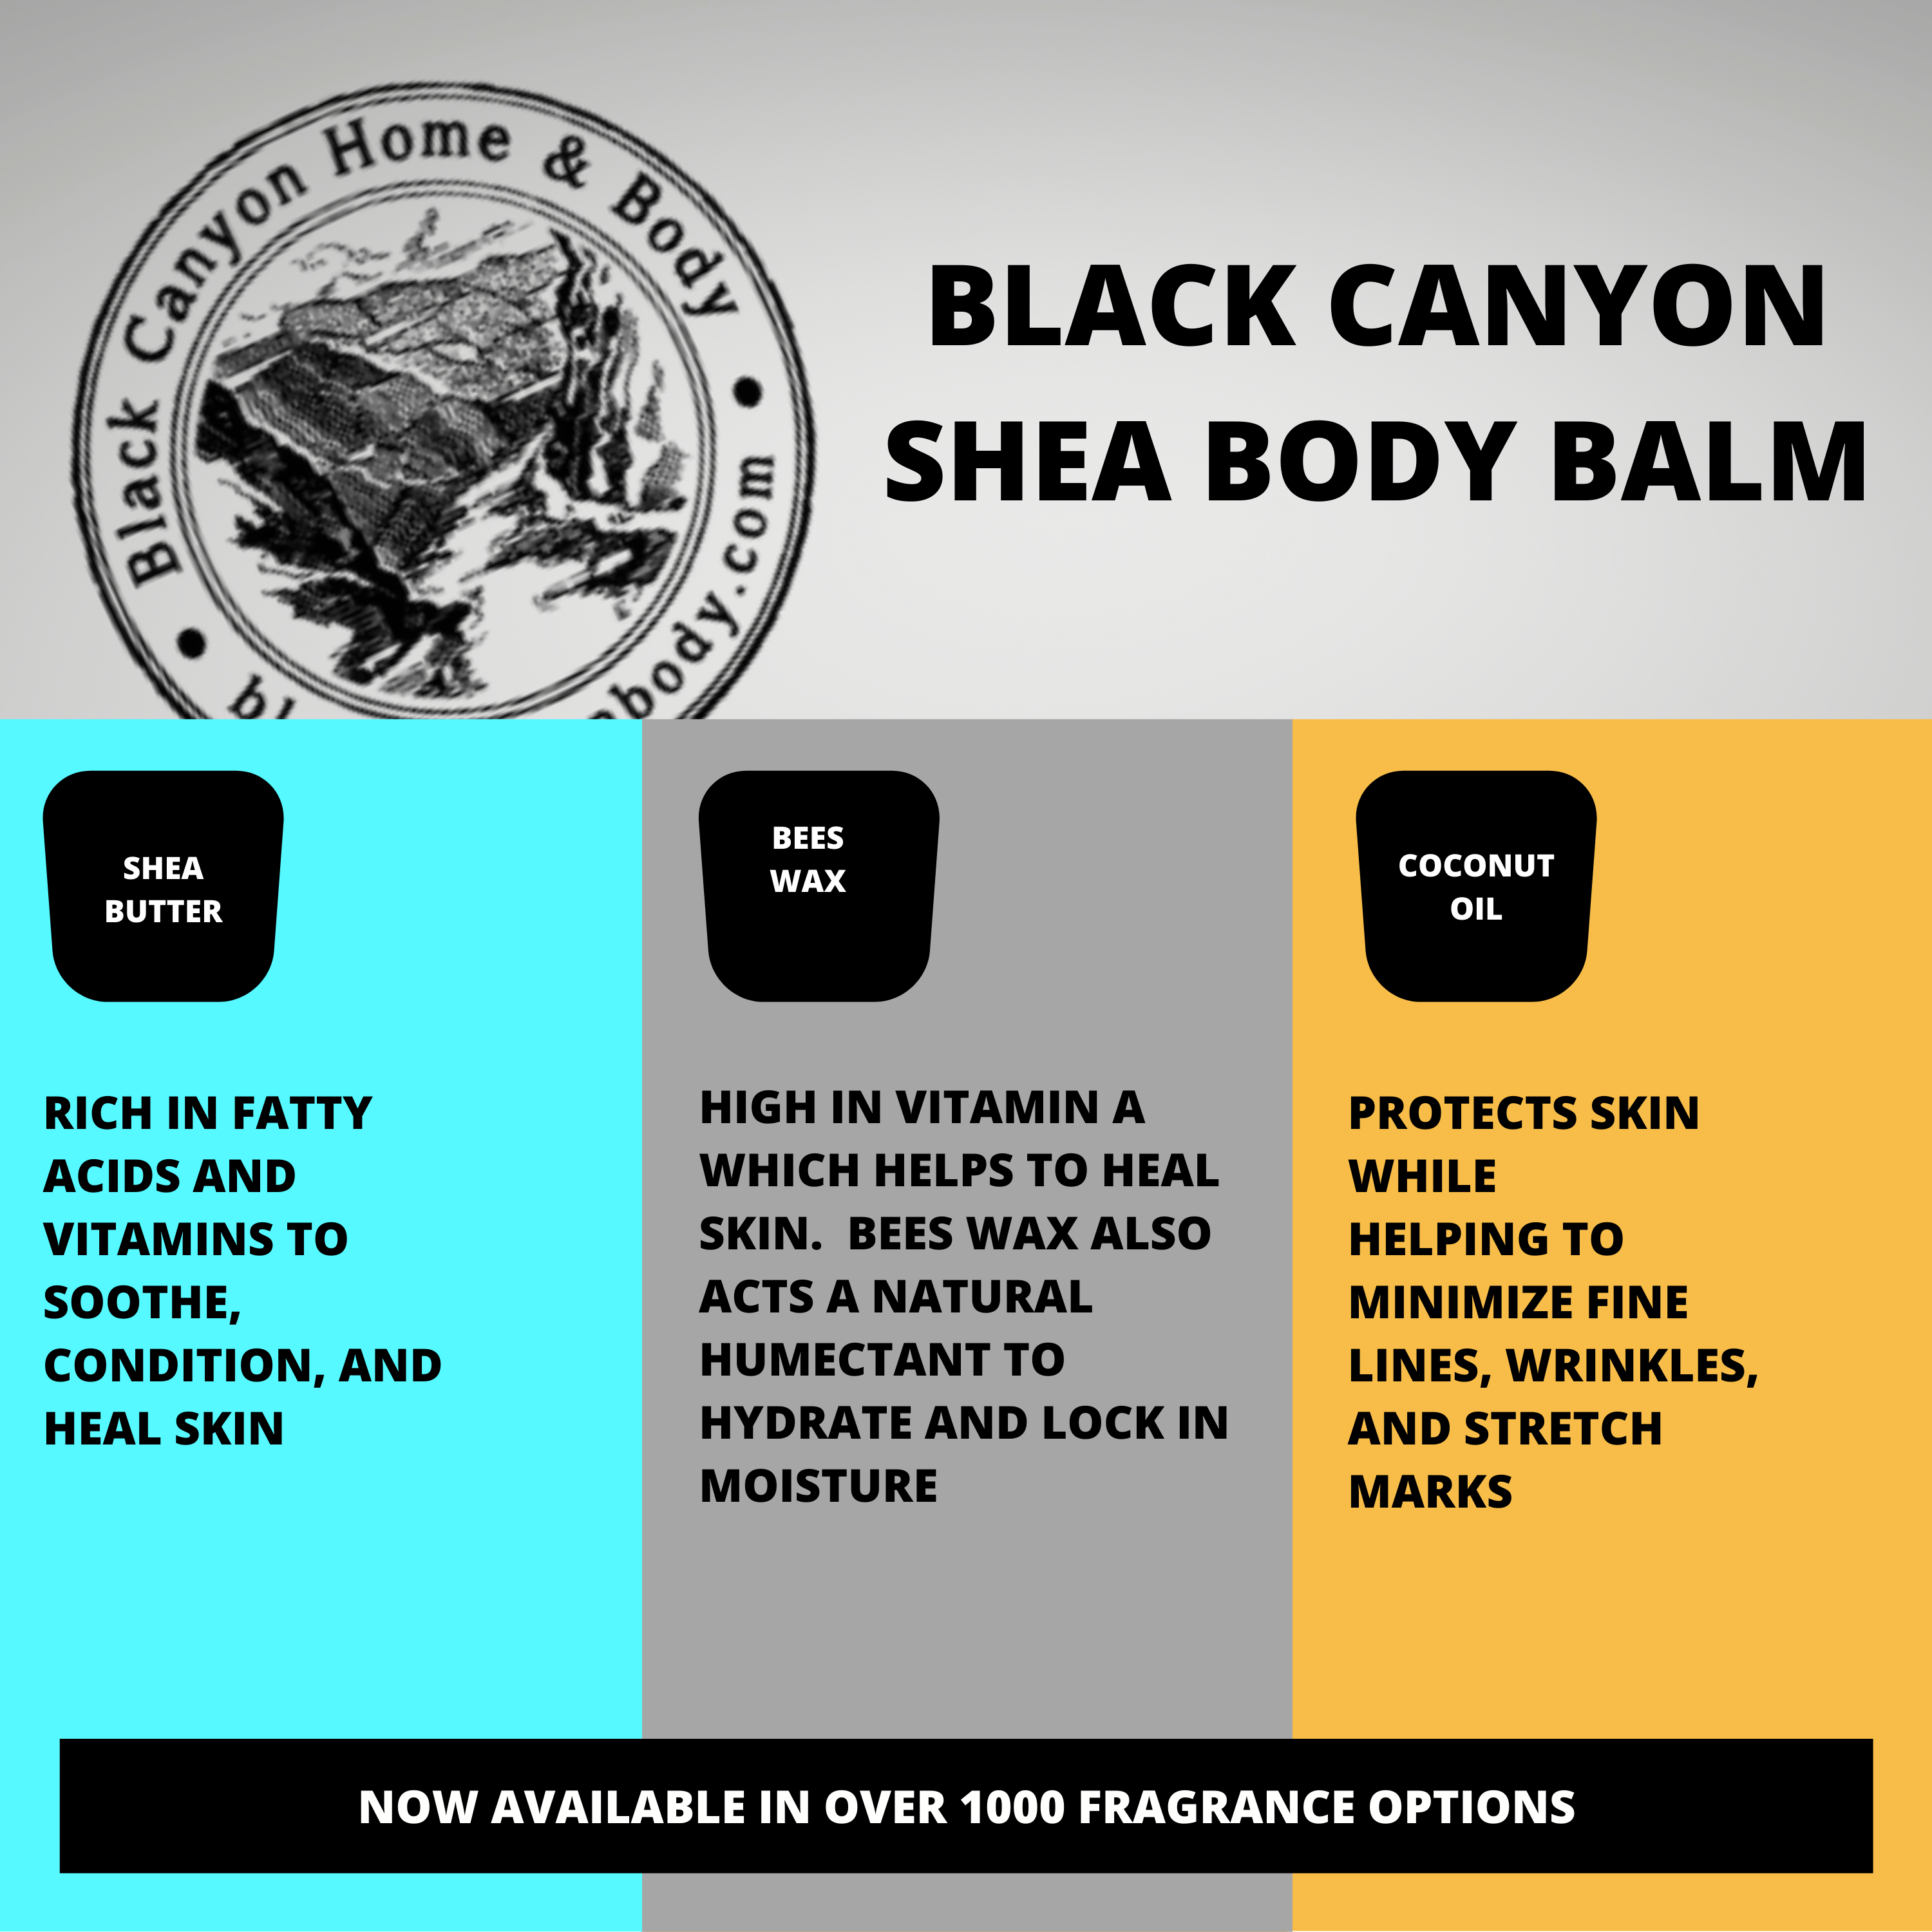 Black Canyon Berry Noir Scented Natural Body Balm with Shea